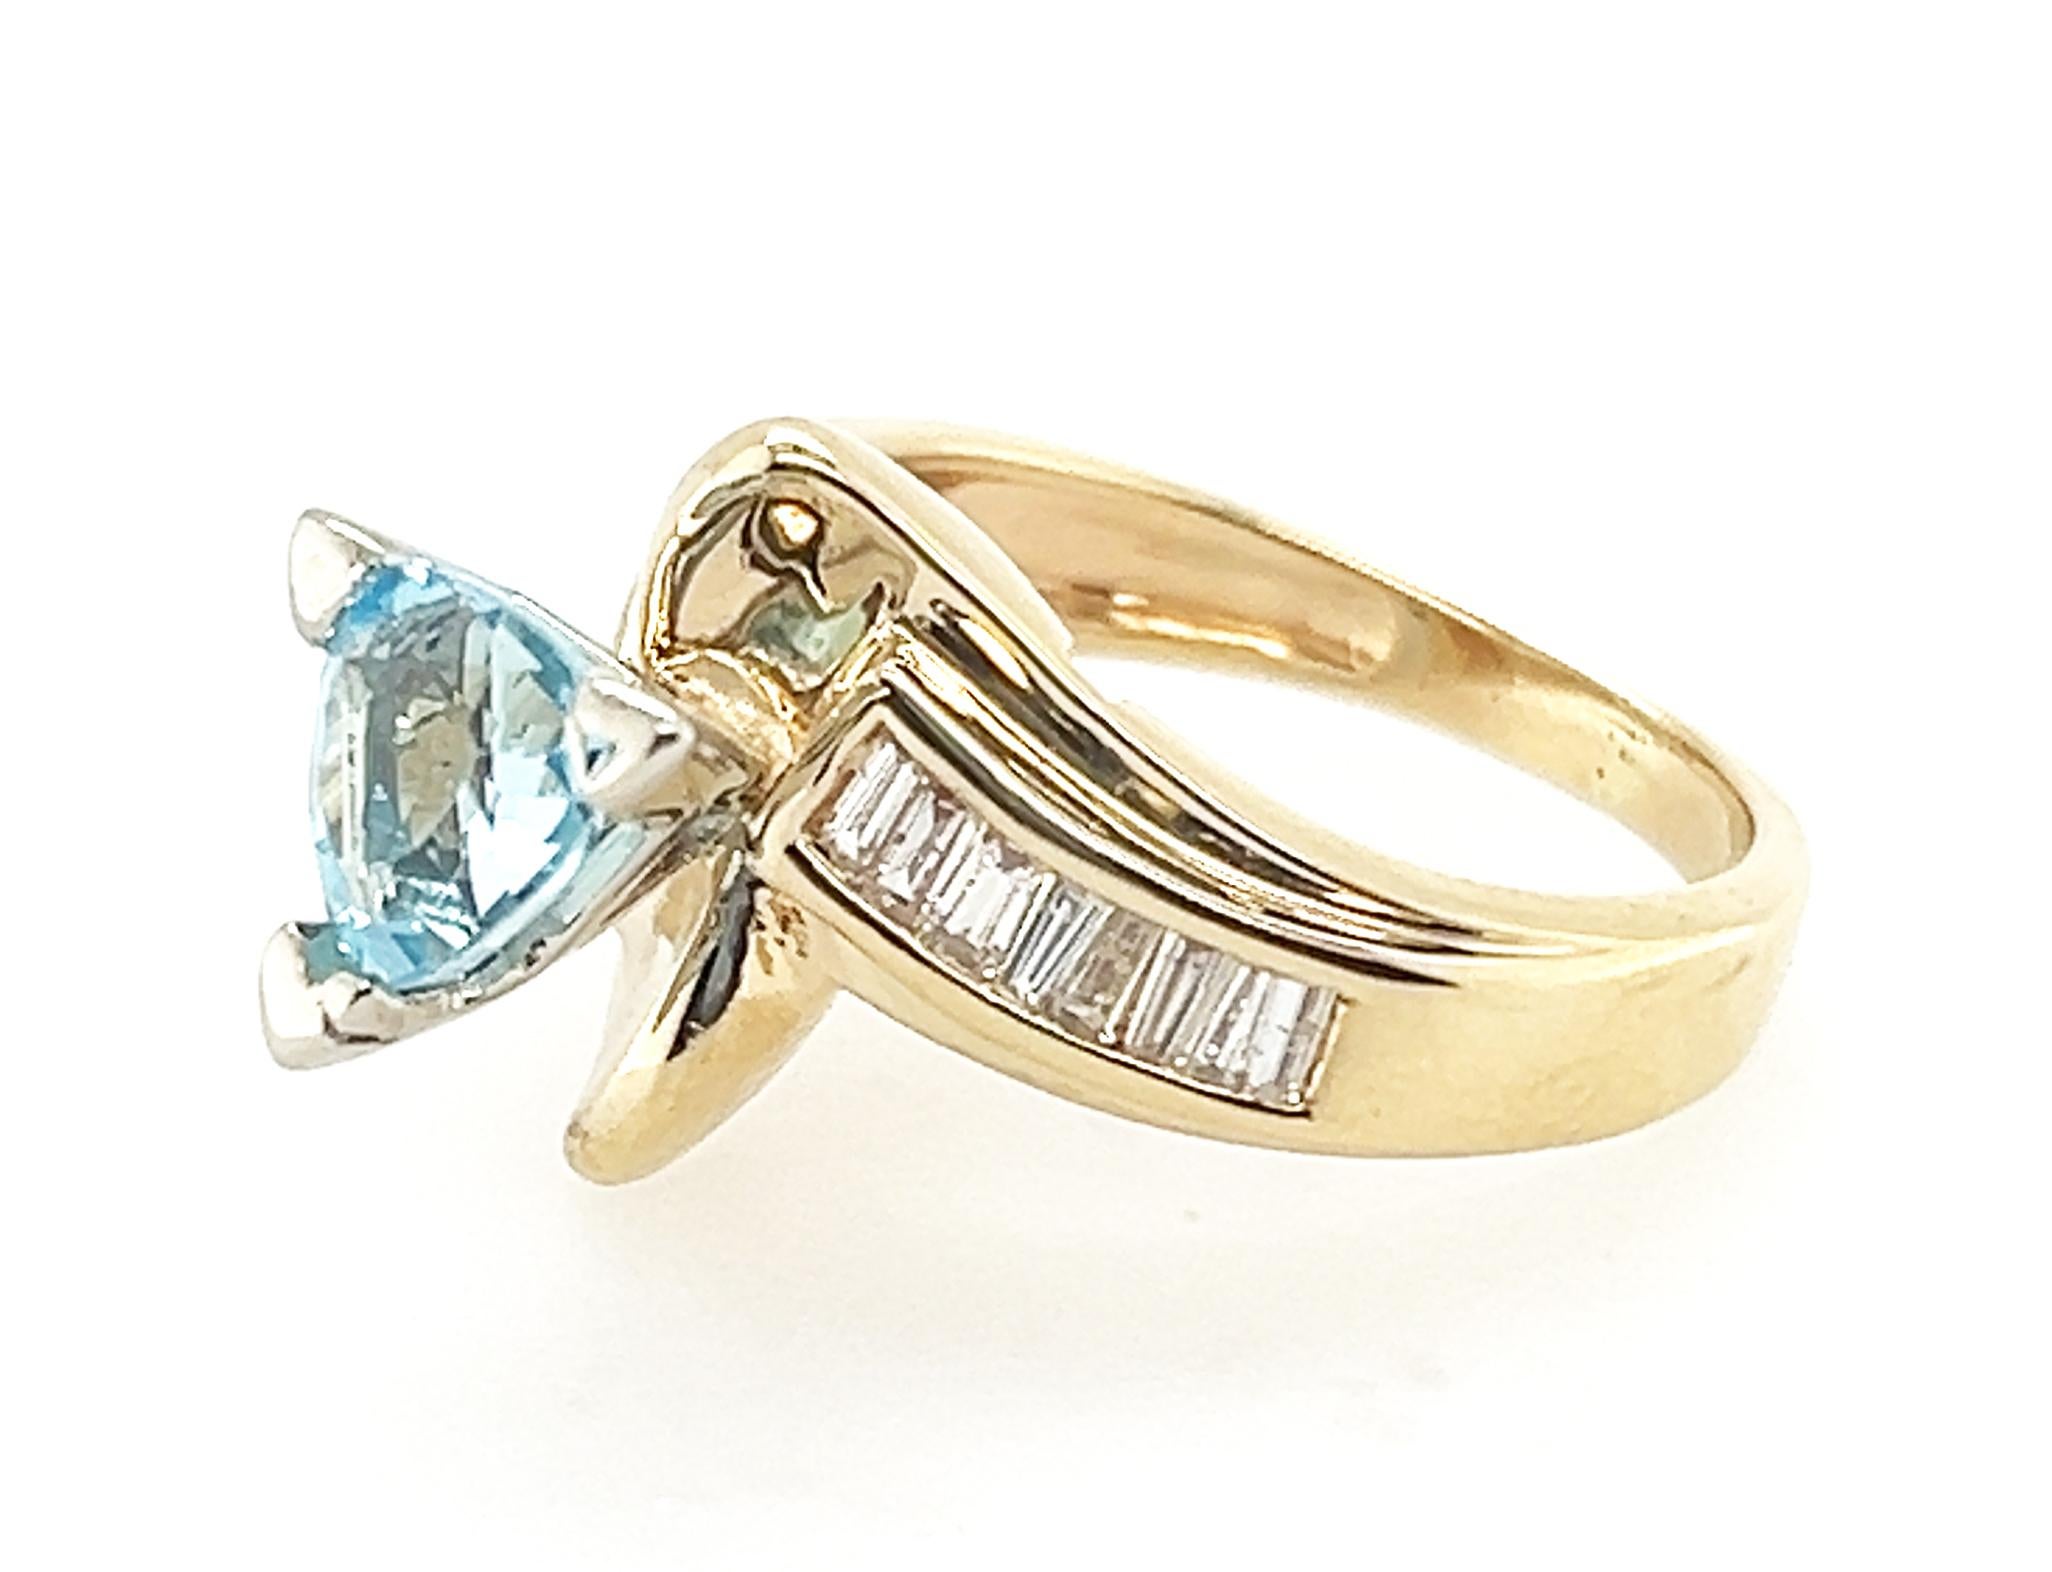 Blue Topaz Diamond Ring 1.56ct Flawless Trillion Cut with Baguettes 14K Gold In Excellent Condition For Sale In Dearborn, MI